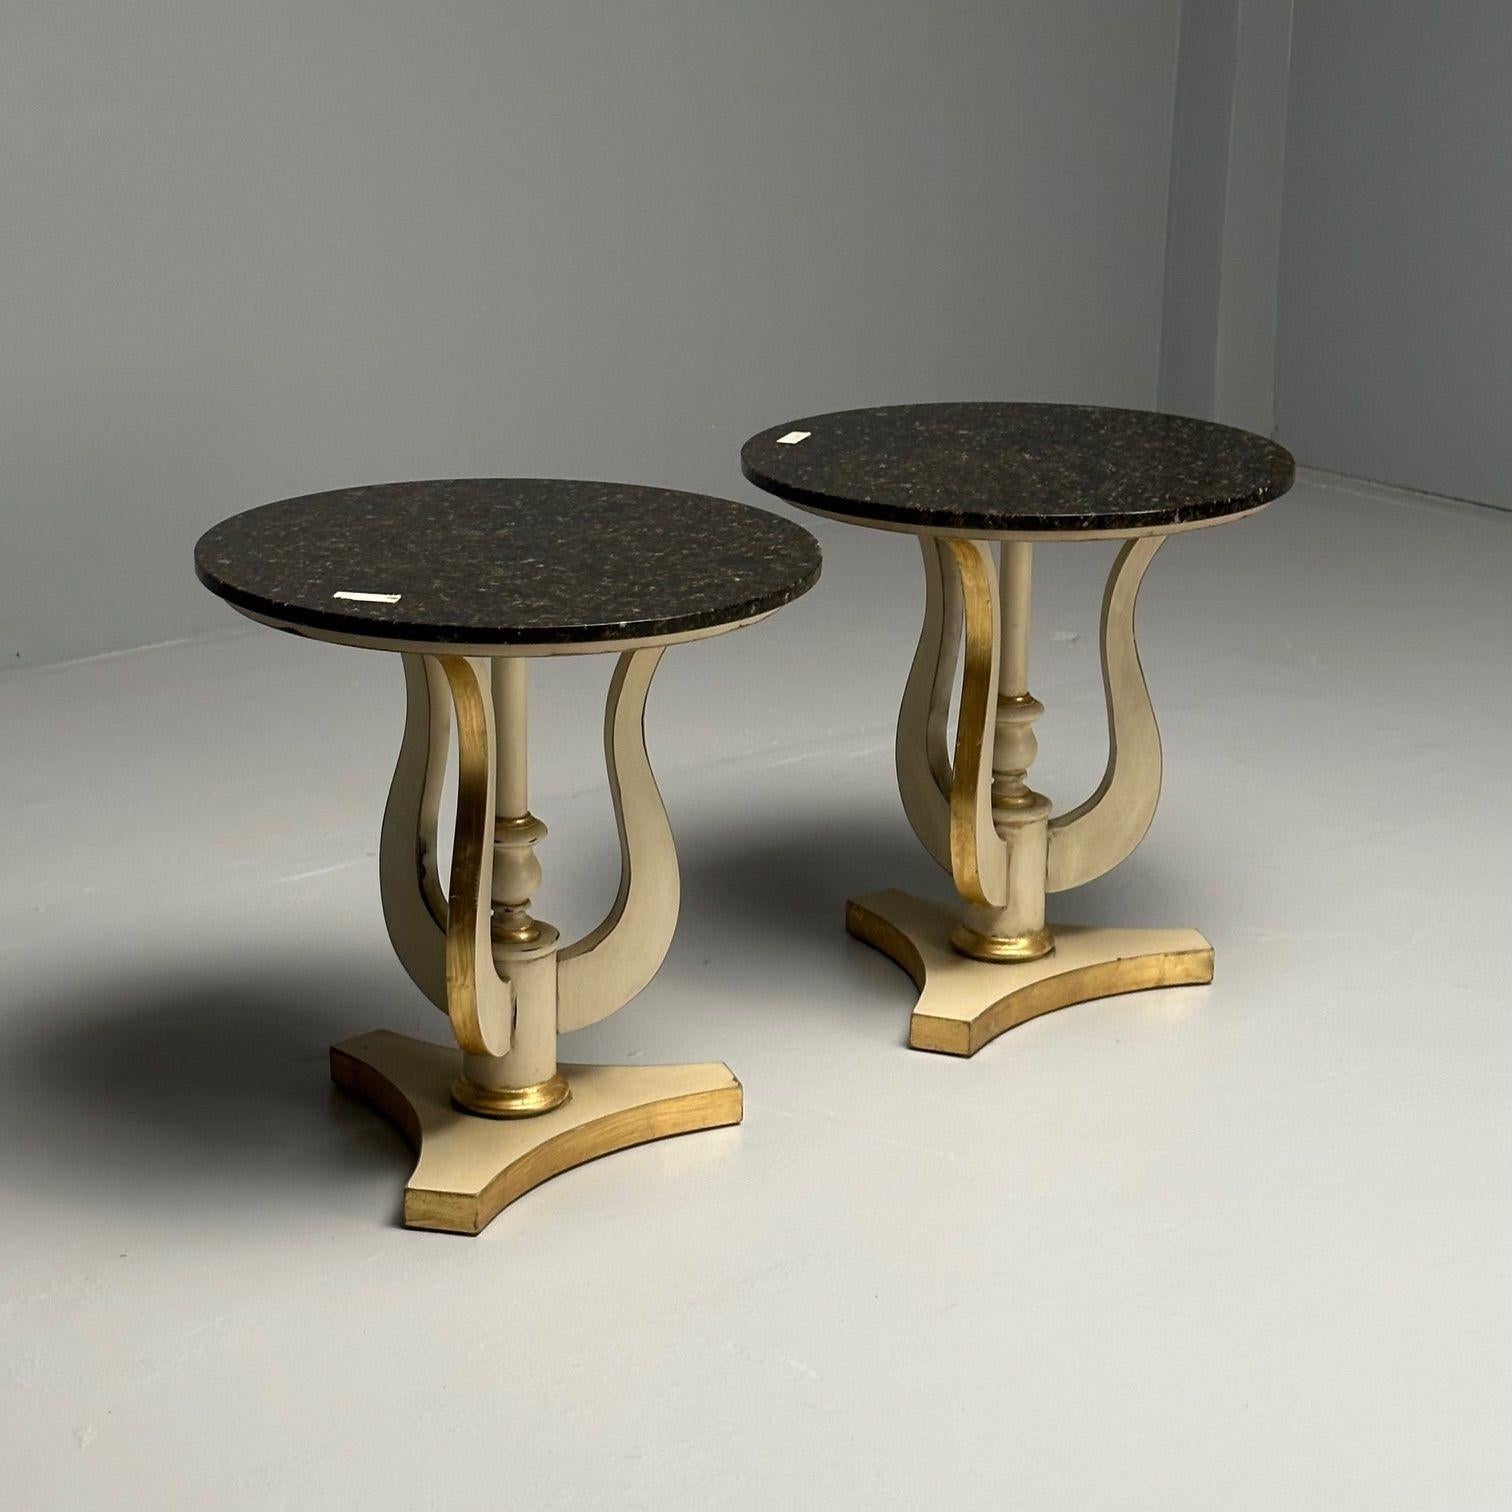 Mid-20th Century Regency, Side Tables, Pedestals, Ivory Paint, Giltwood, Marble Tops, USA, 1960s For Sale